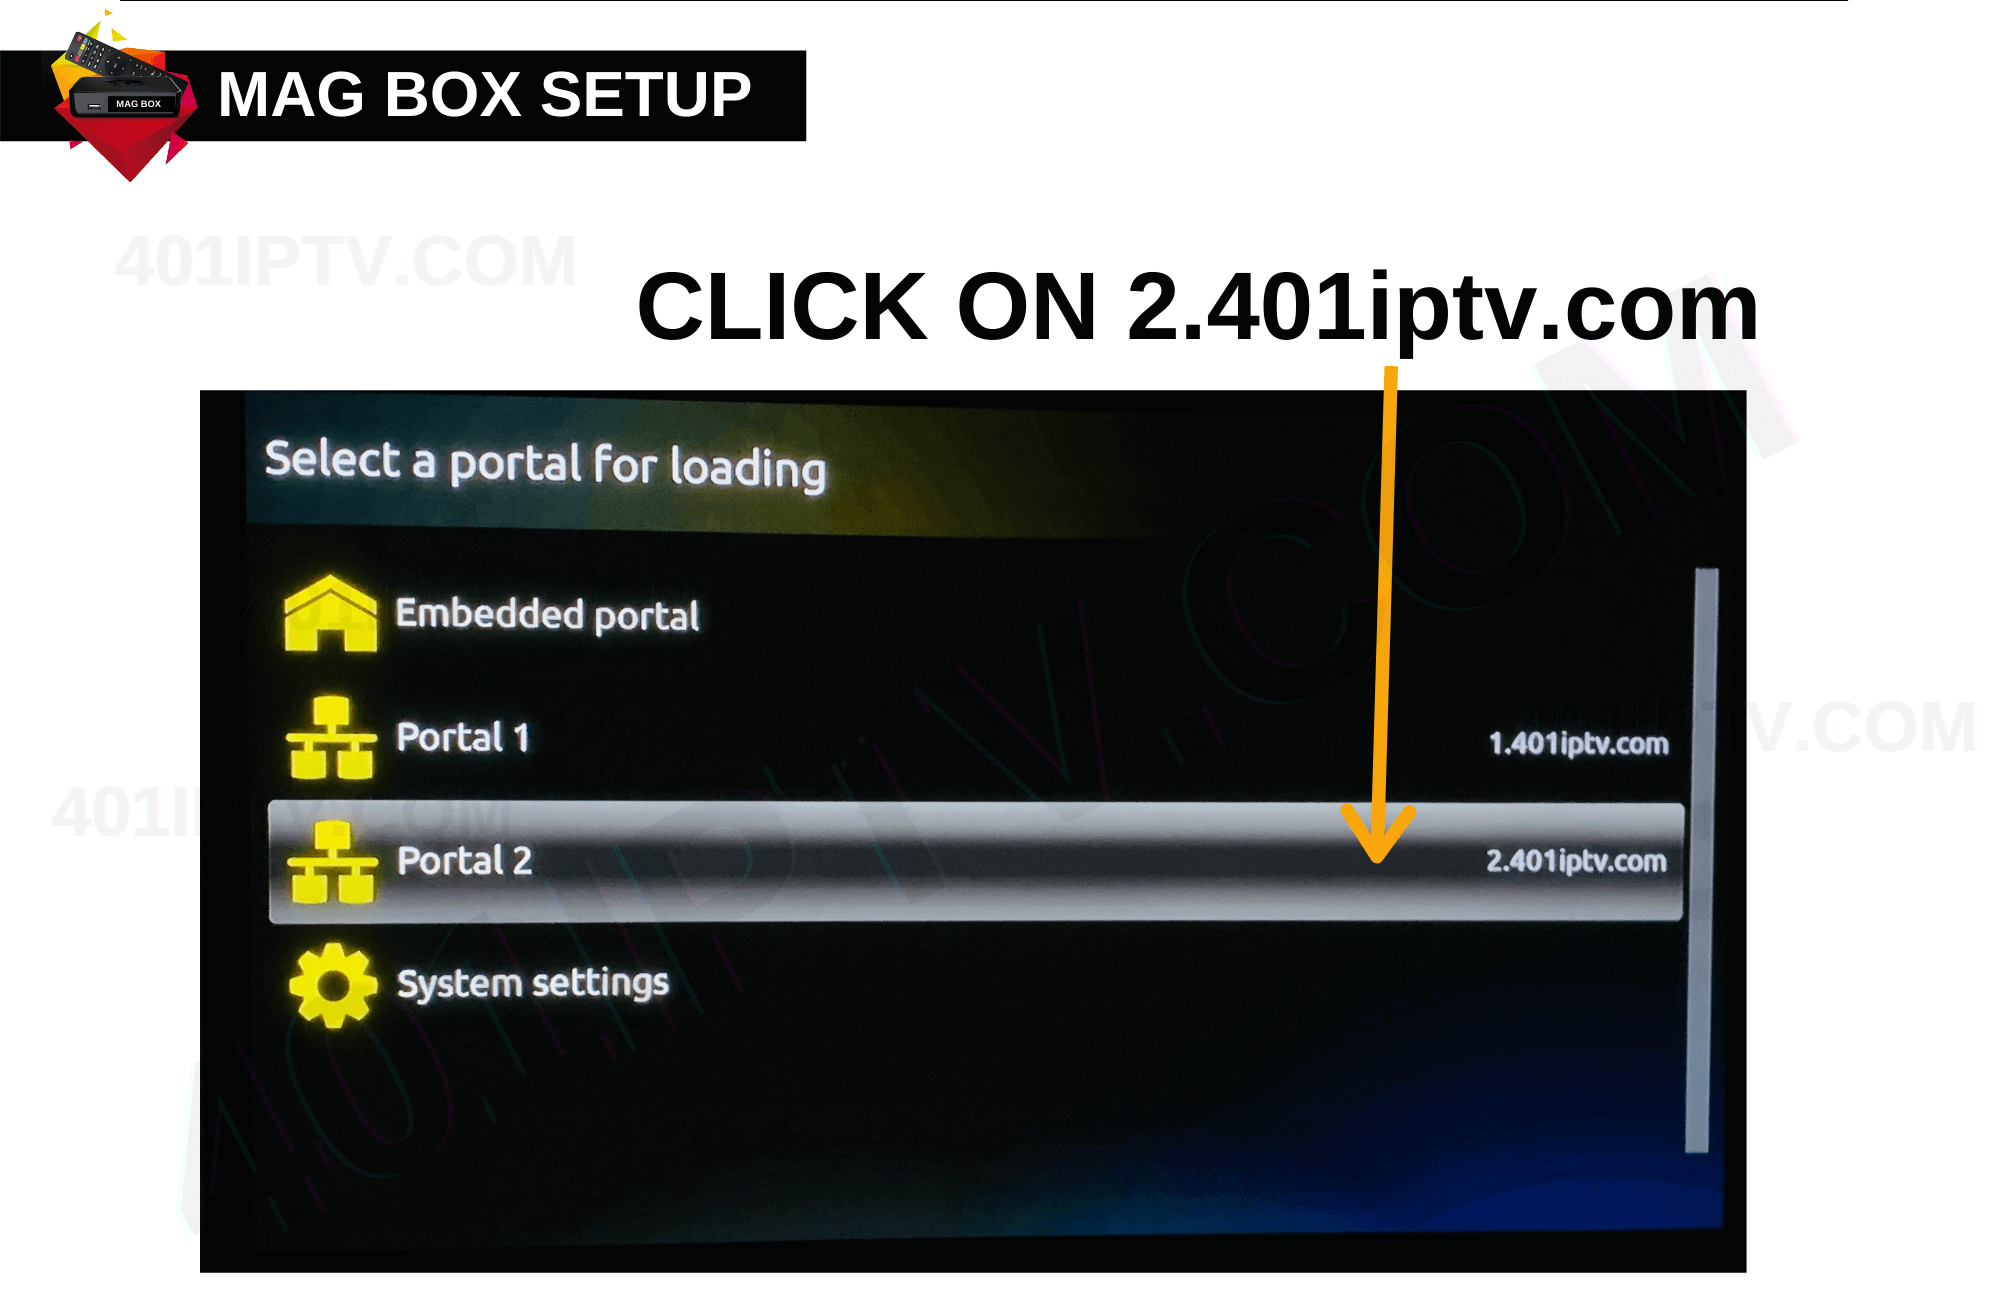 02 HOW TO SETUP MAG BOX IF SUBSCRIPTION IS EXPIRED-11